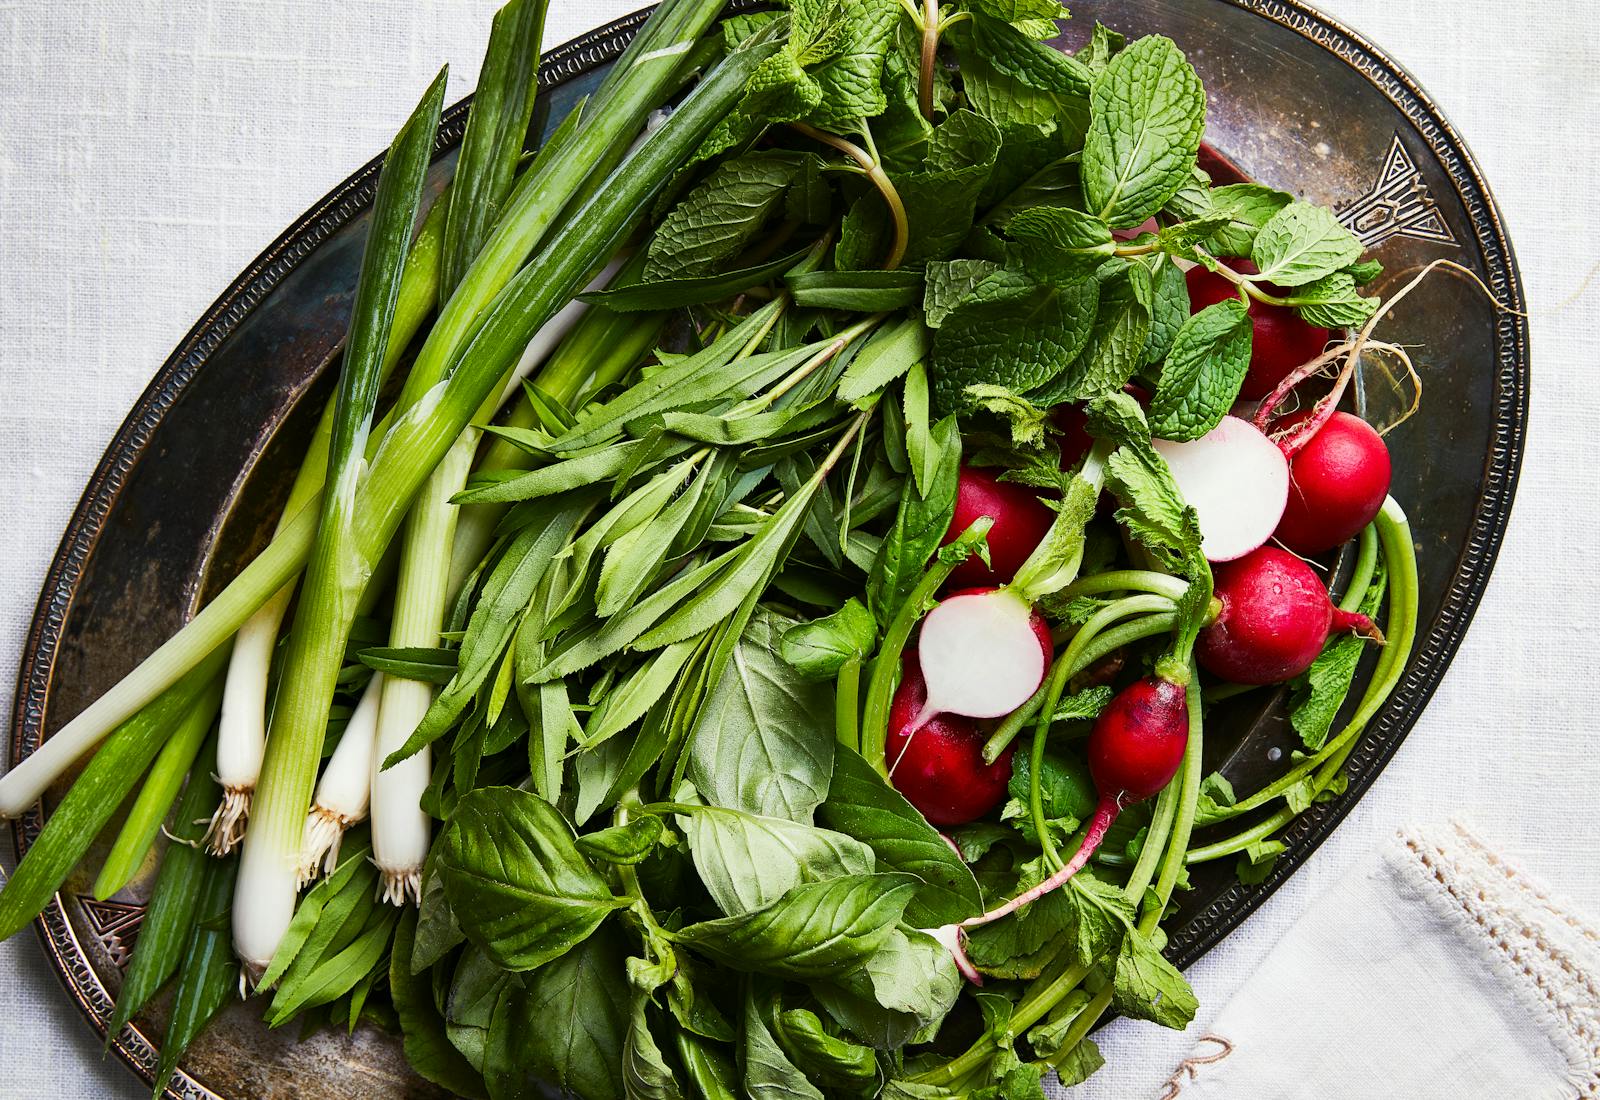 Plate of fresh herbs: scallions, basil, mint, and radishes.